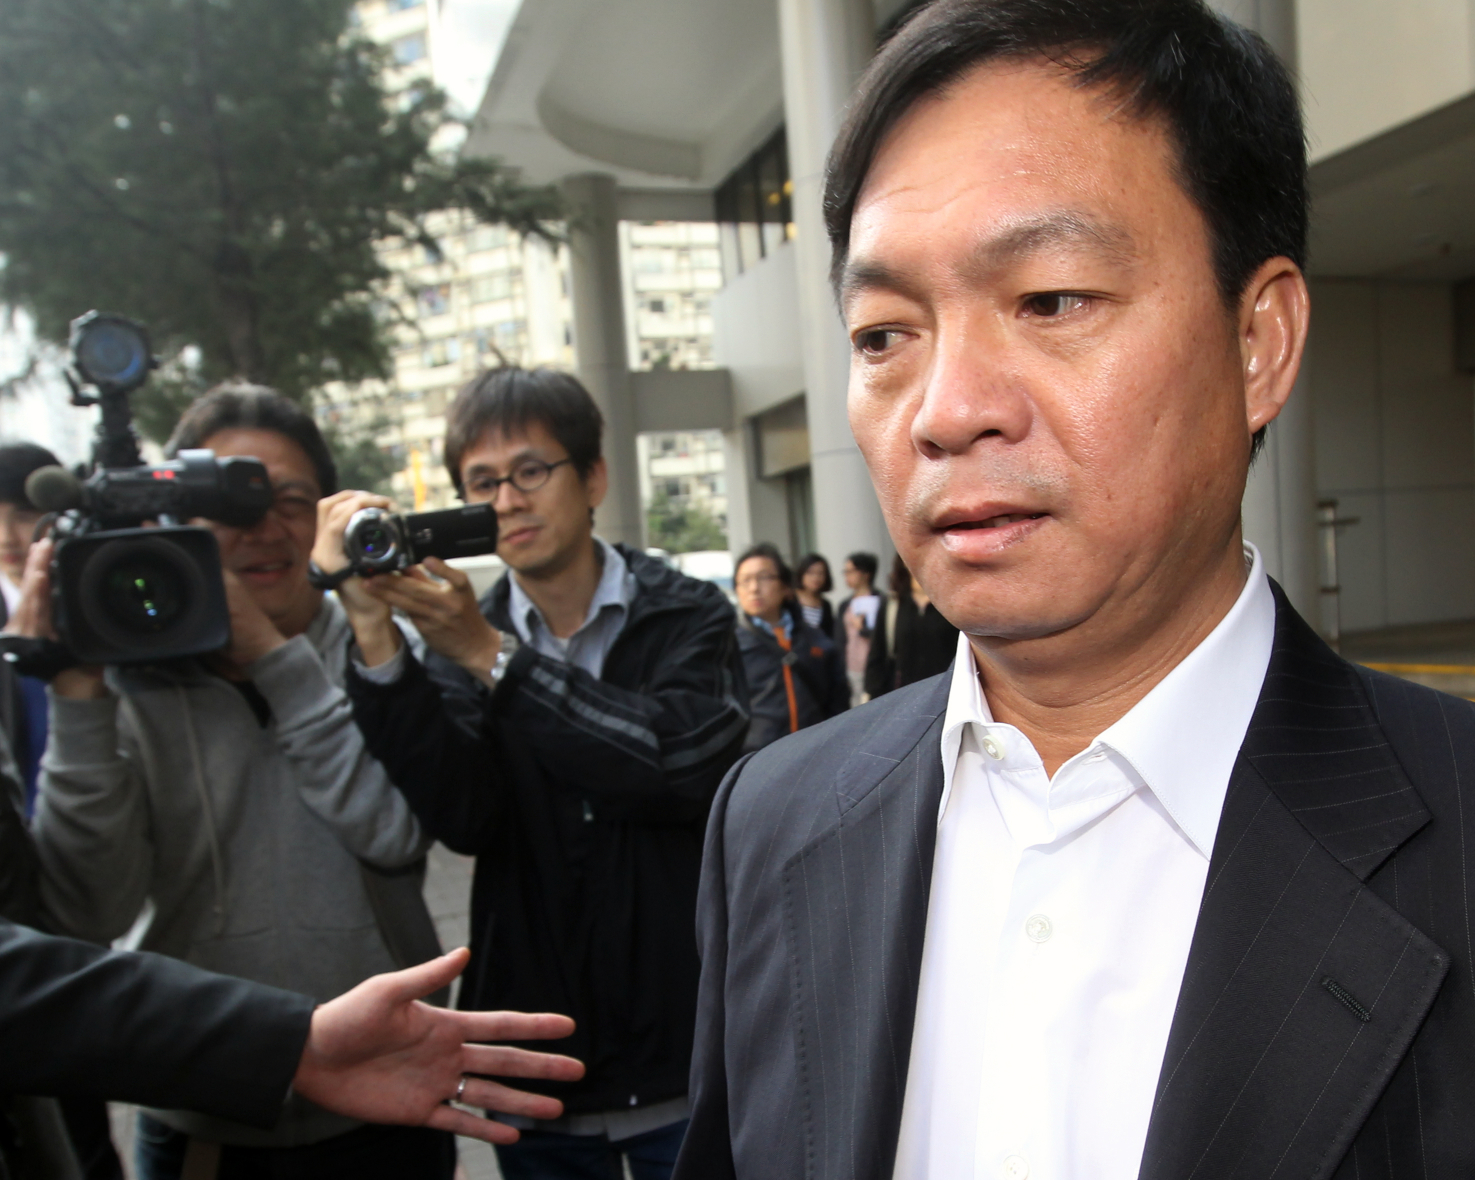 Agile chairman Chen Zhuolin has been detained on the mainland. Photo: Edward Wong